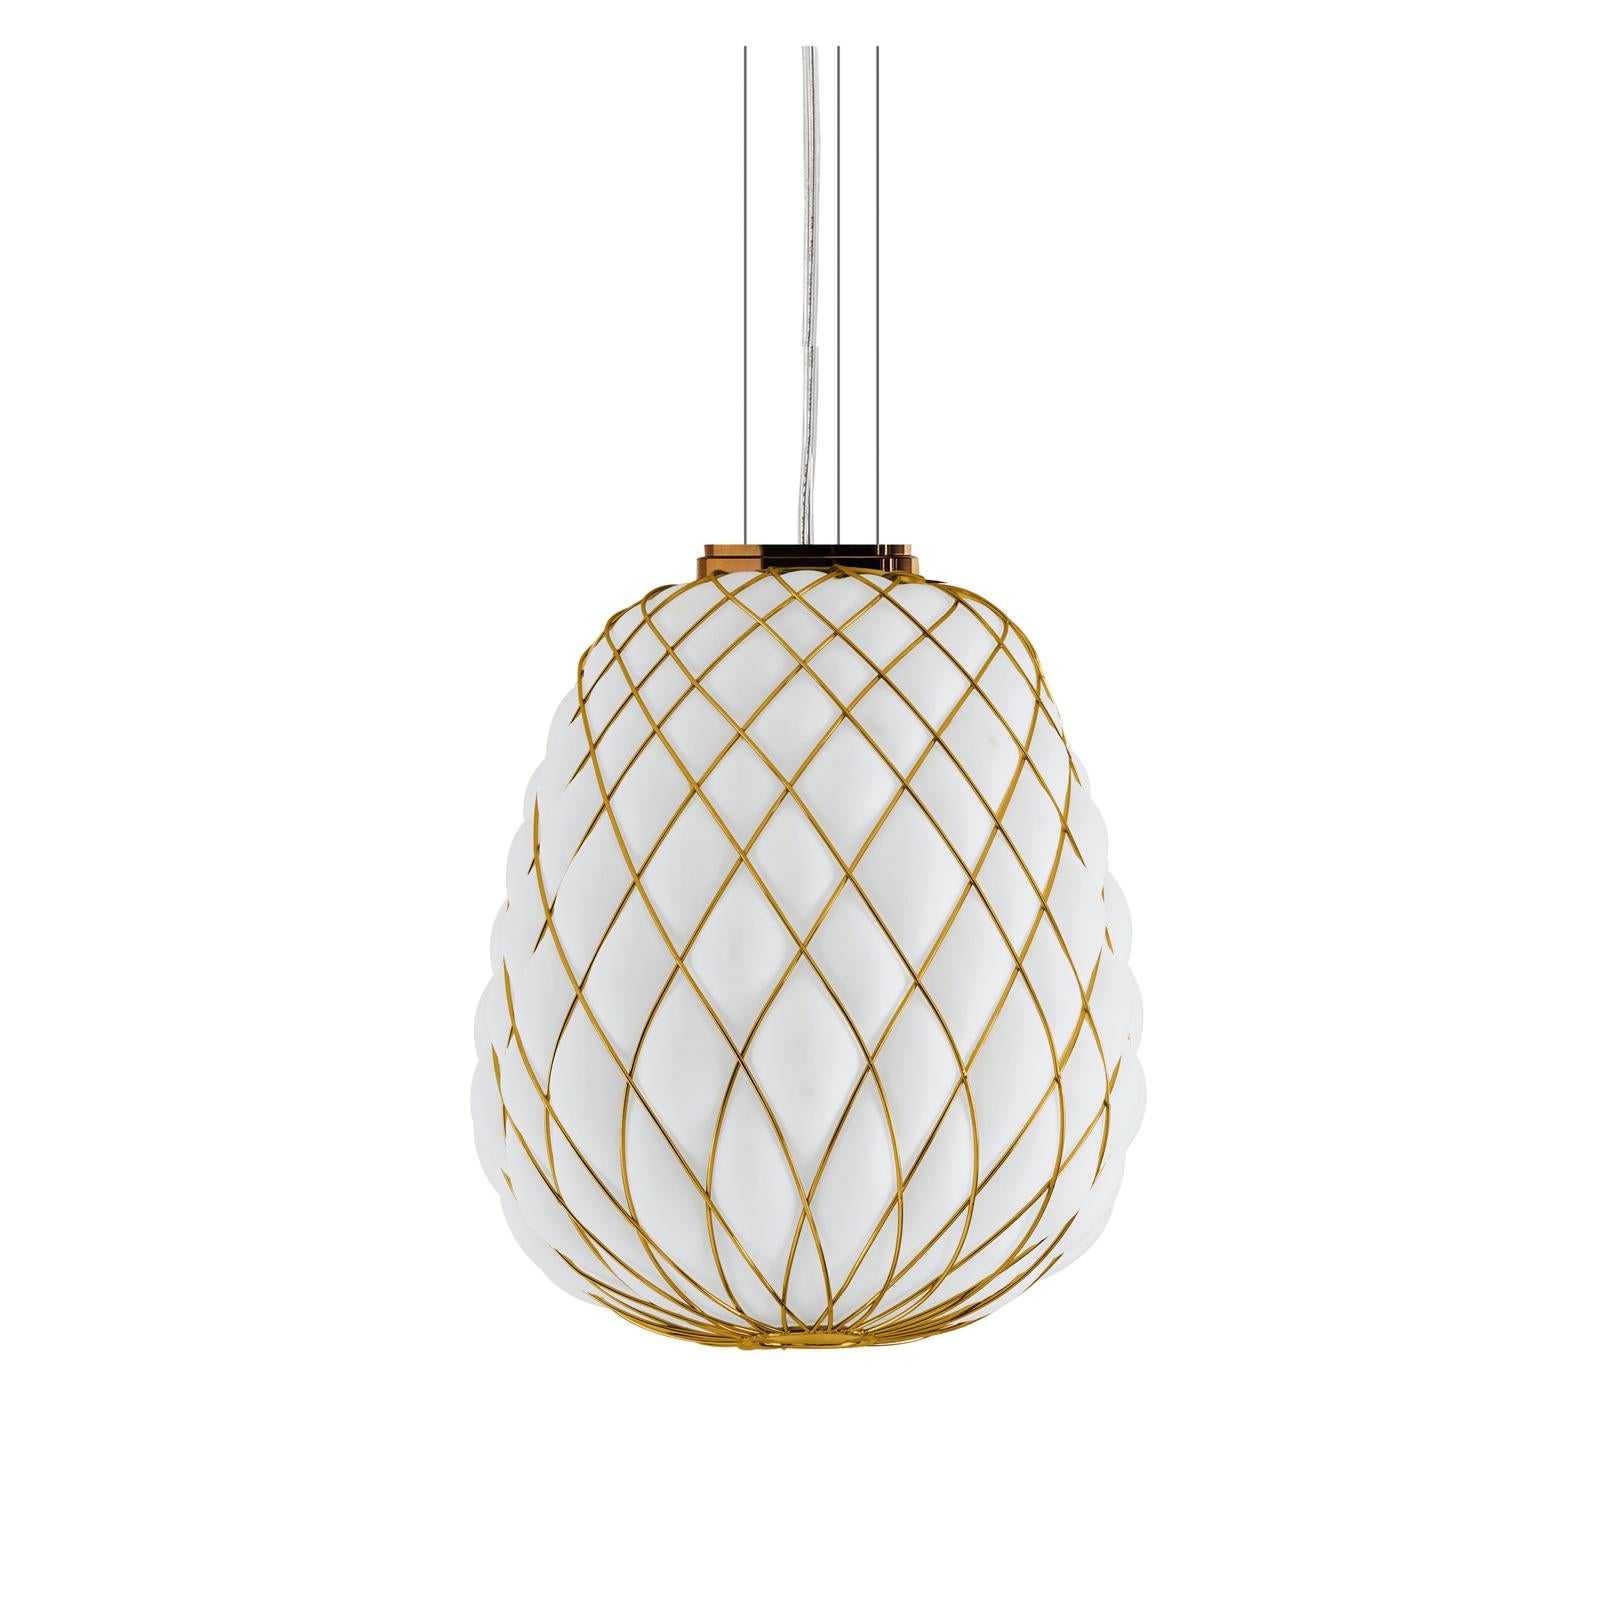 Large 'Pinecone' suspension lamp in opaline glass & gold metal for Fontana Arte. Designed by Paola Navone, the Pinecone comes in both a suspension and table lamp. The diffuser is manufactured using the ancient caged blown glass technique: the glass